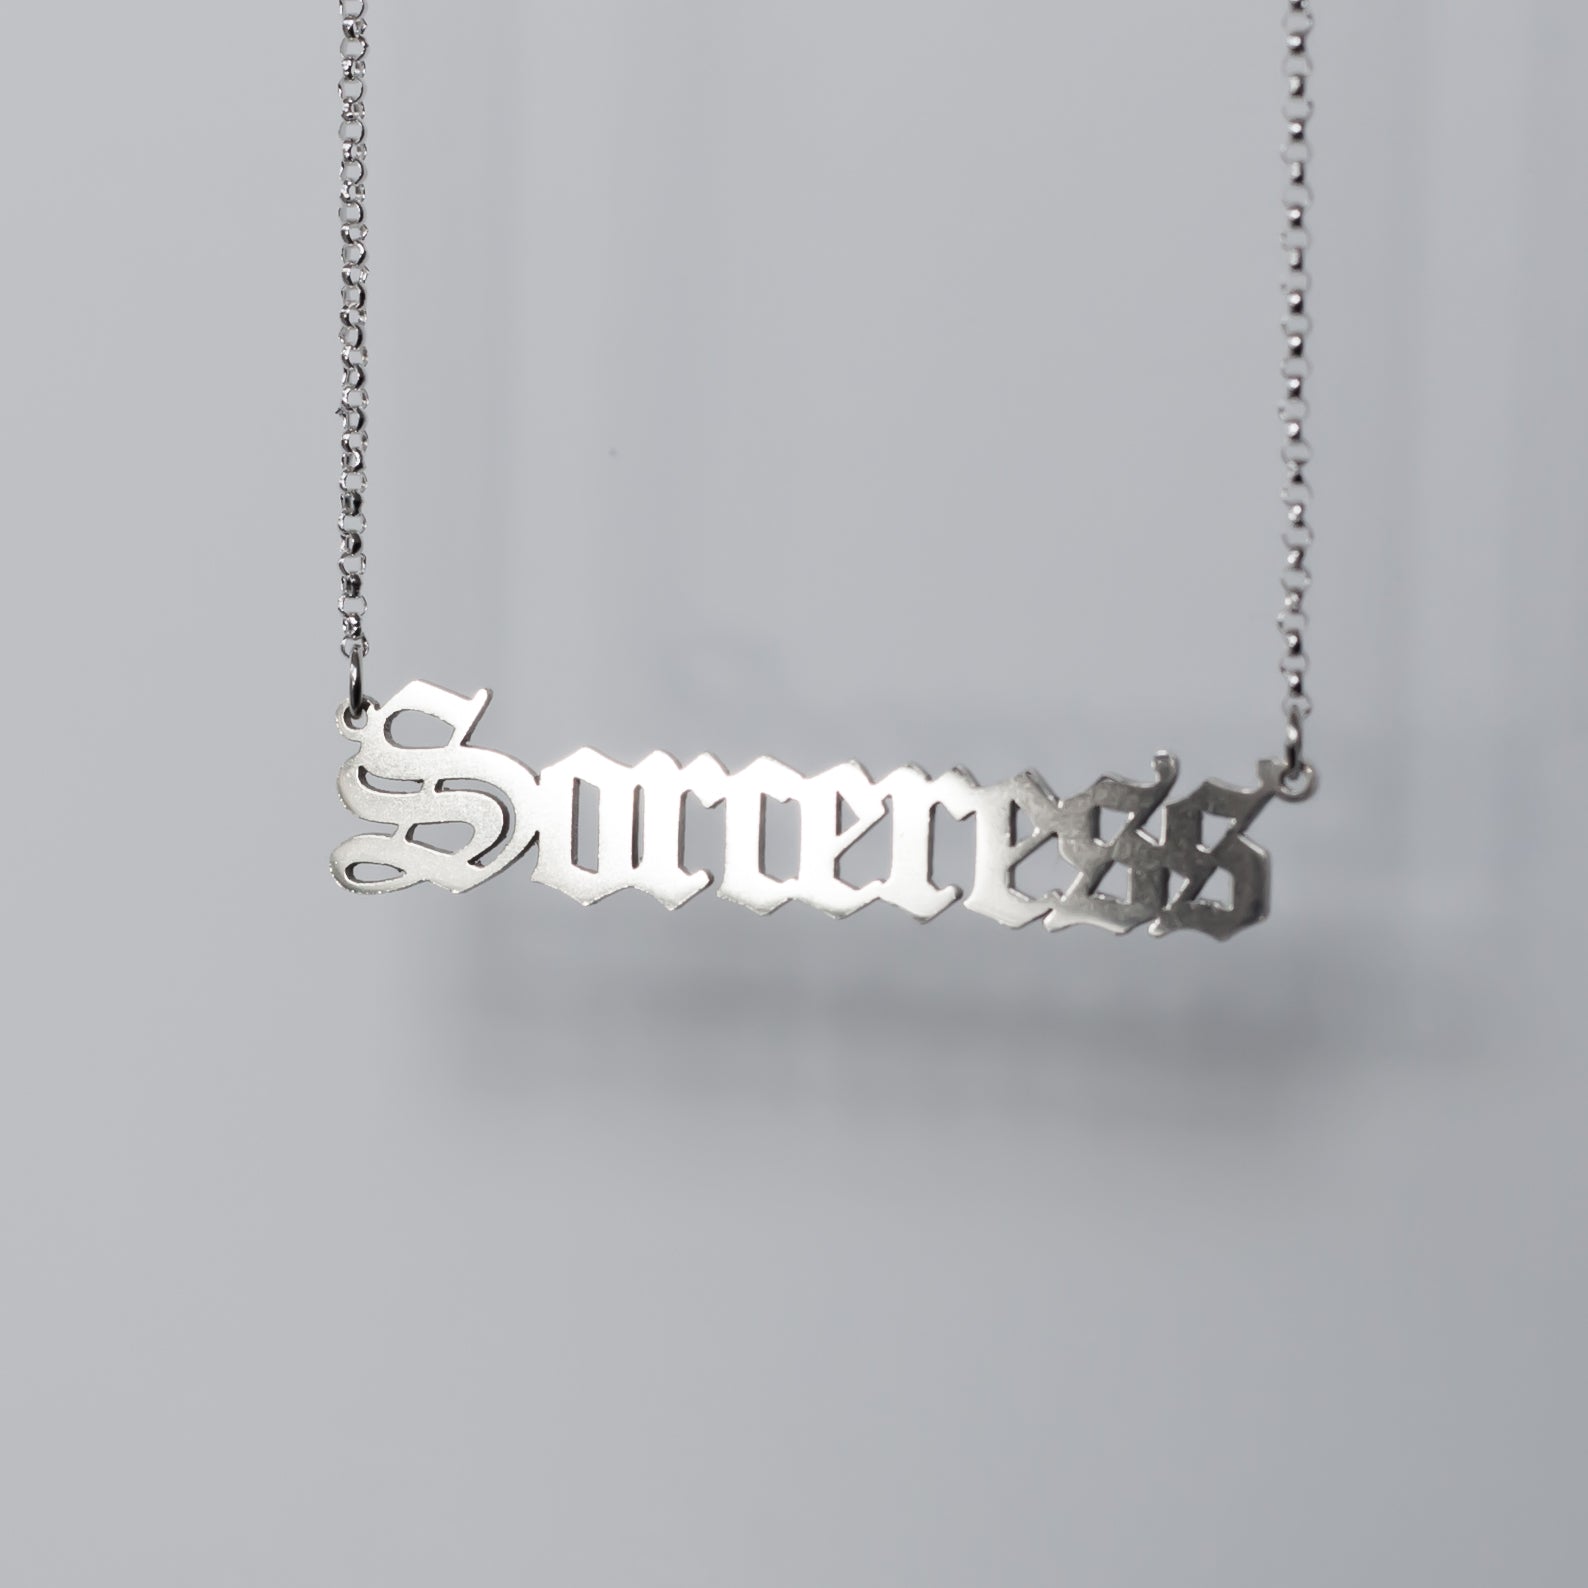 Sorceress Necklace in gothic blackletter font in sterling silver